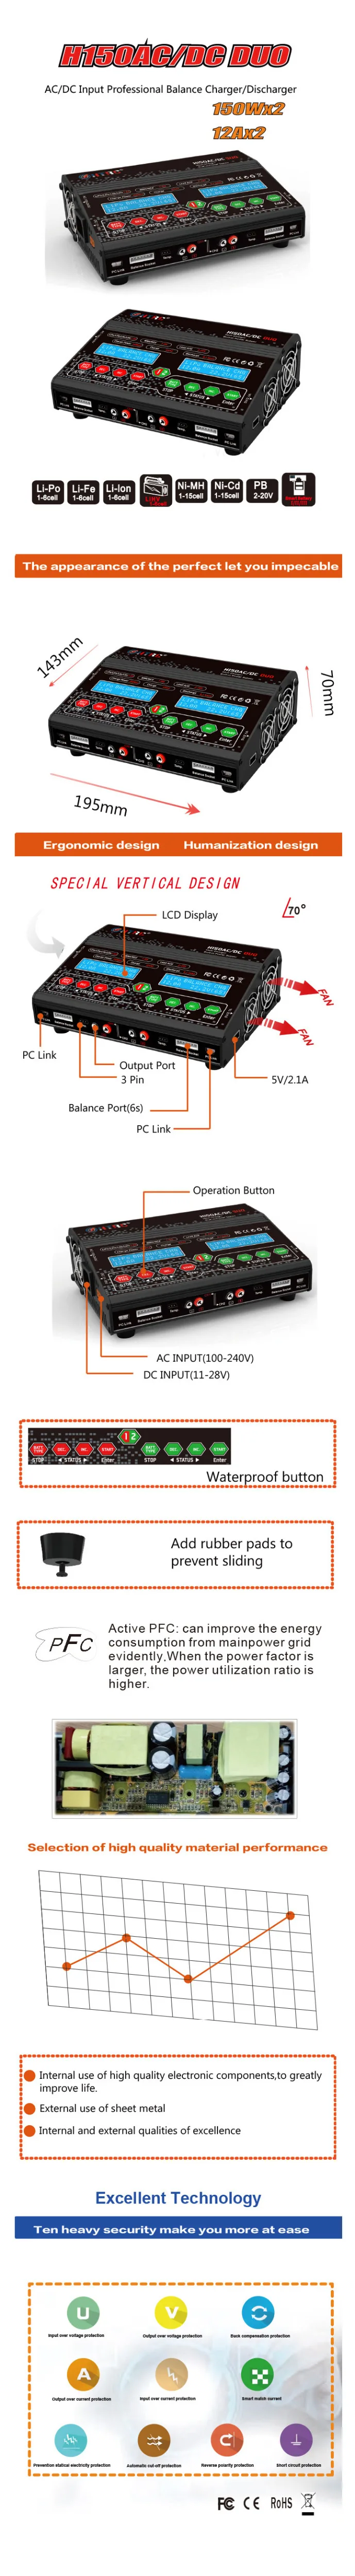 HTRC H150 AC DC DUO 150W 12A Balance charger (1)